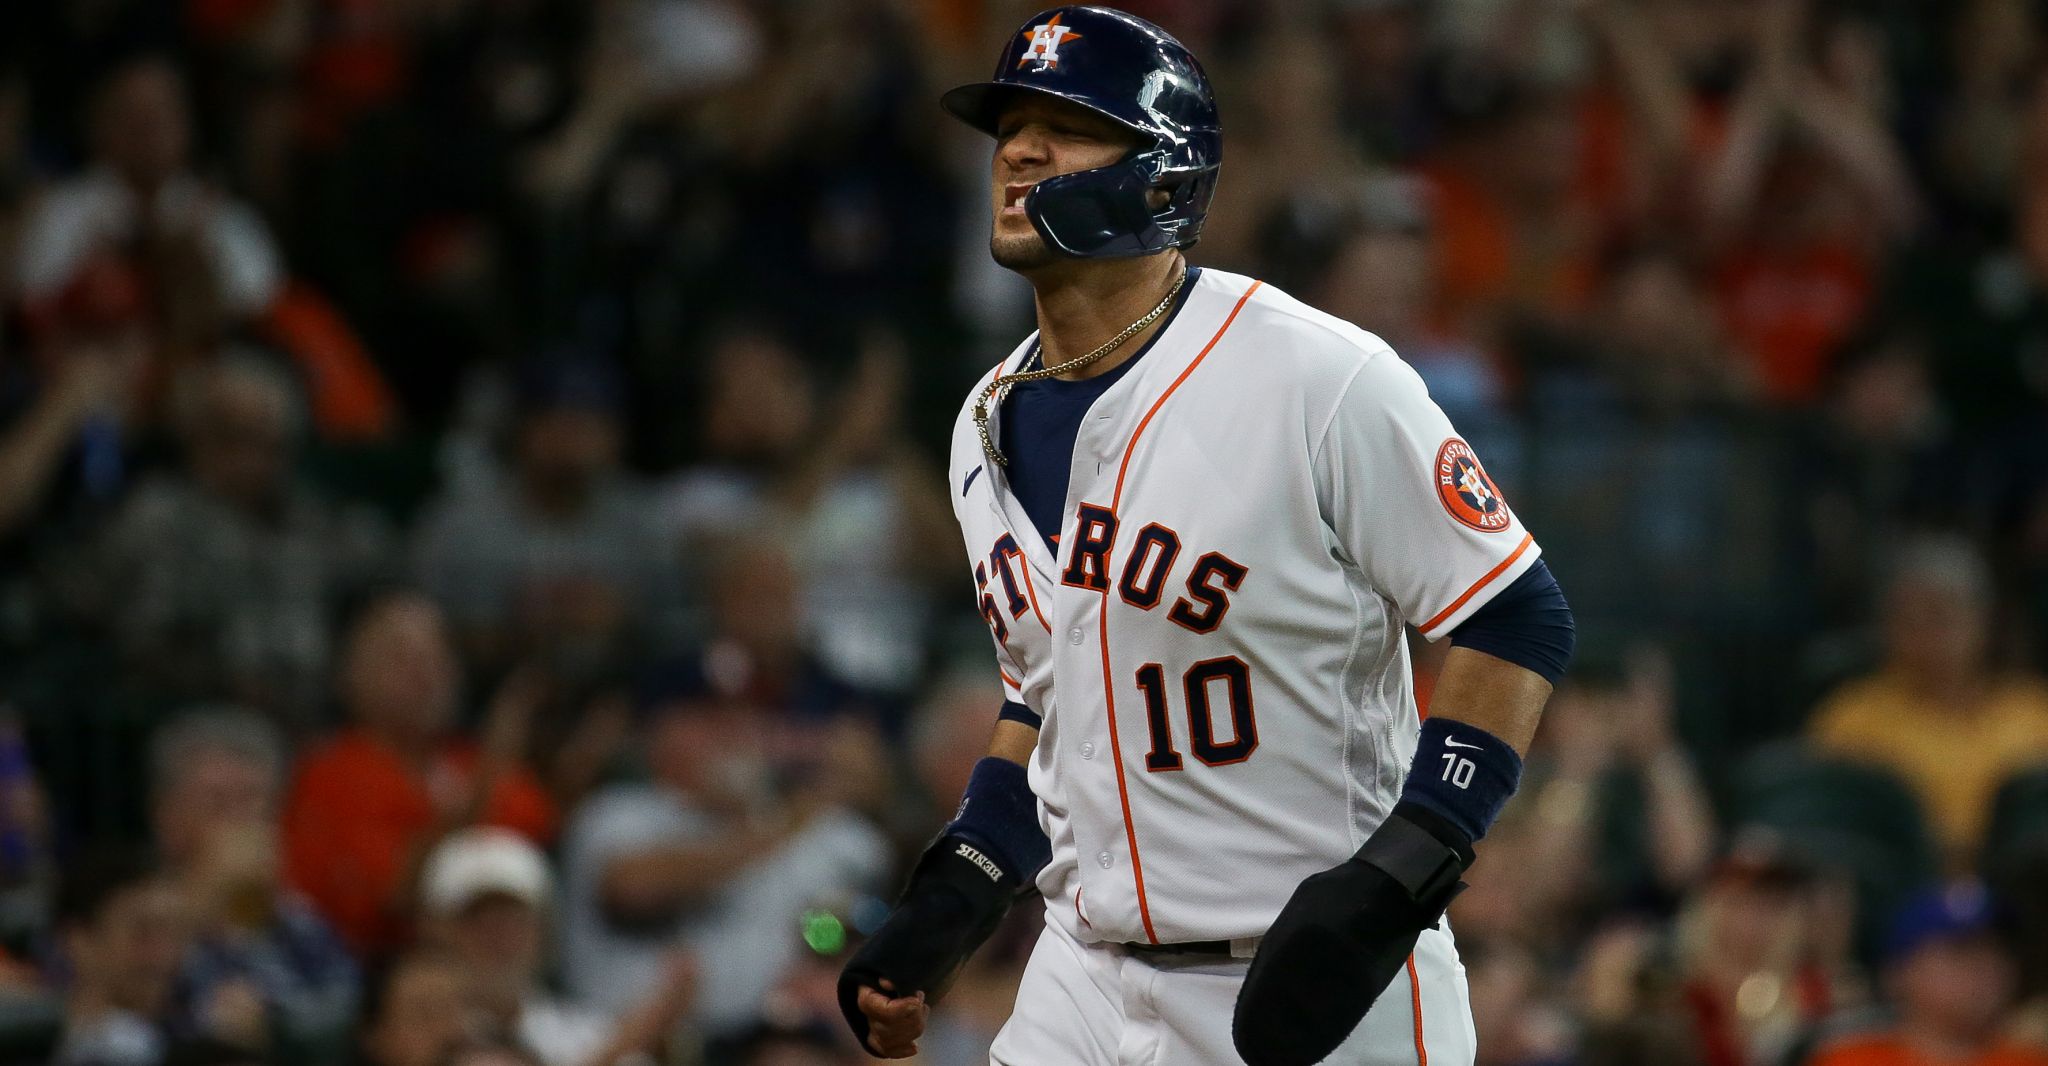 Astros' Yuli Gurriel gets day off before road trip